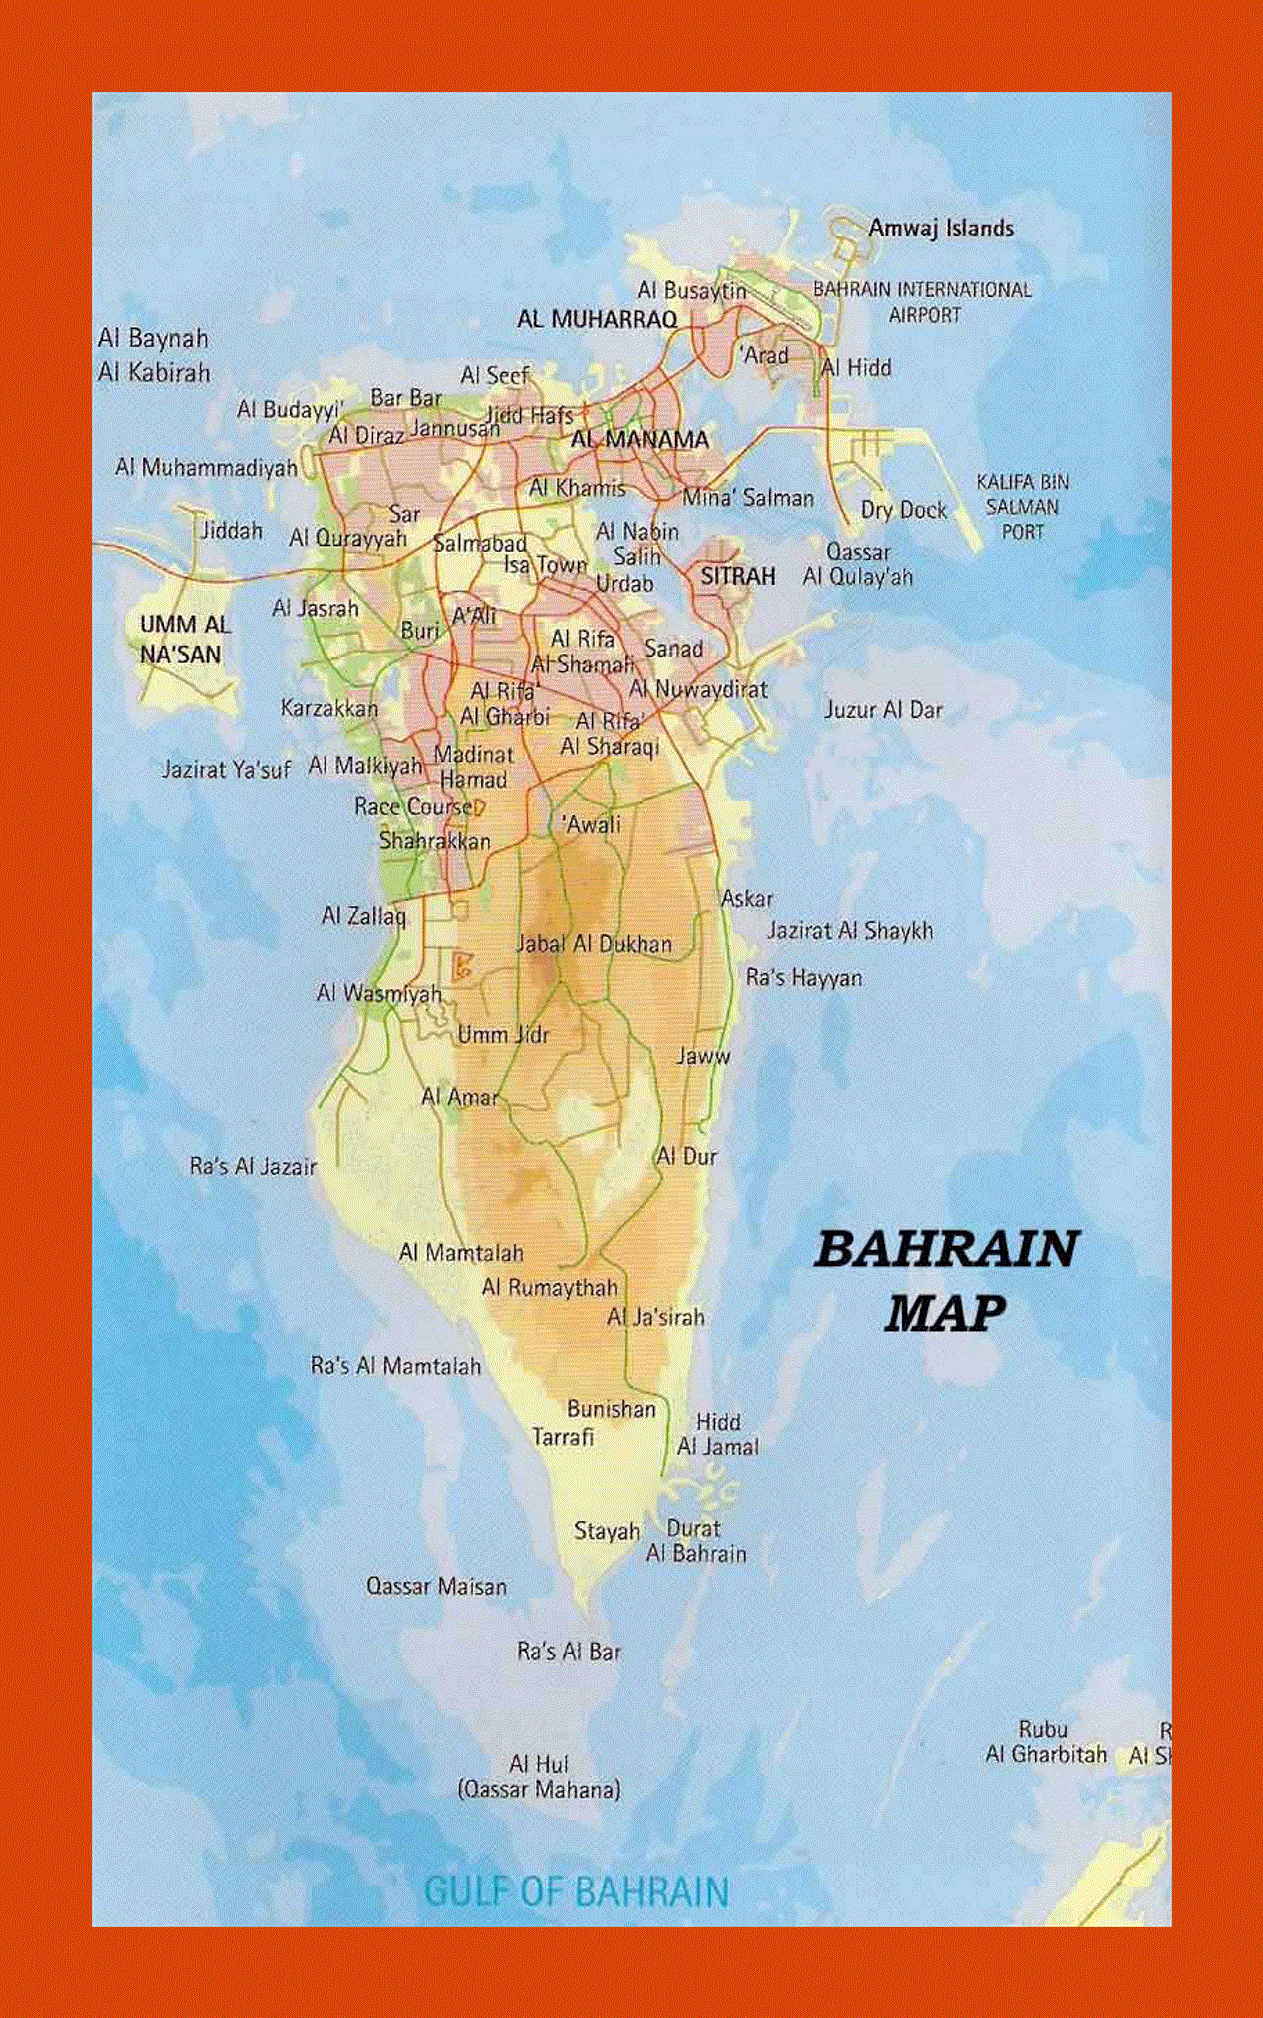 Road and elevation map of Bahrain